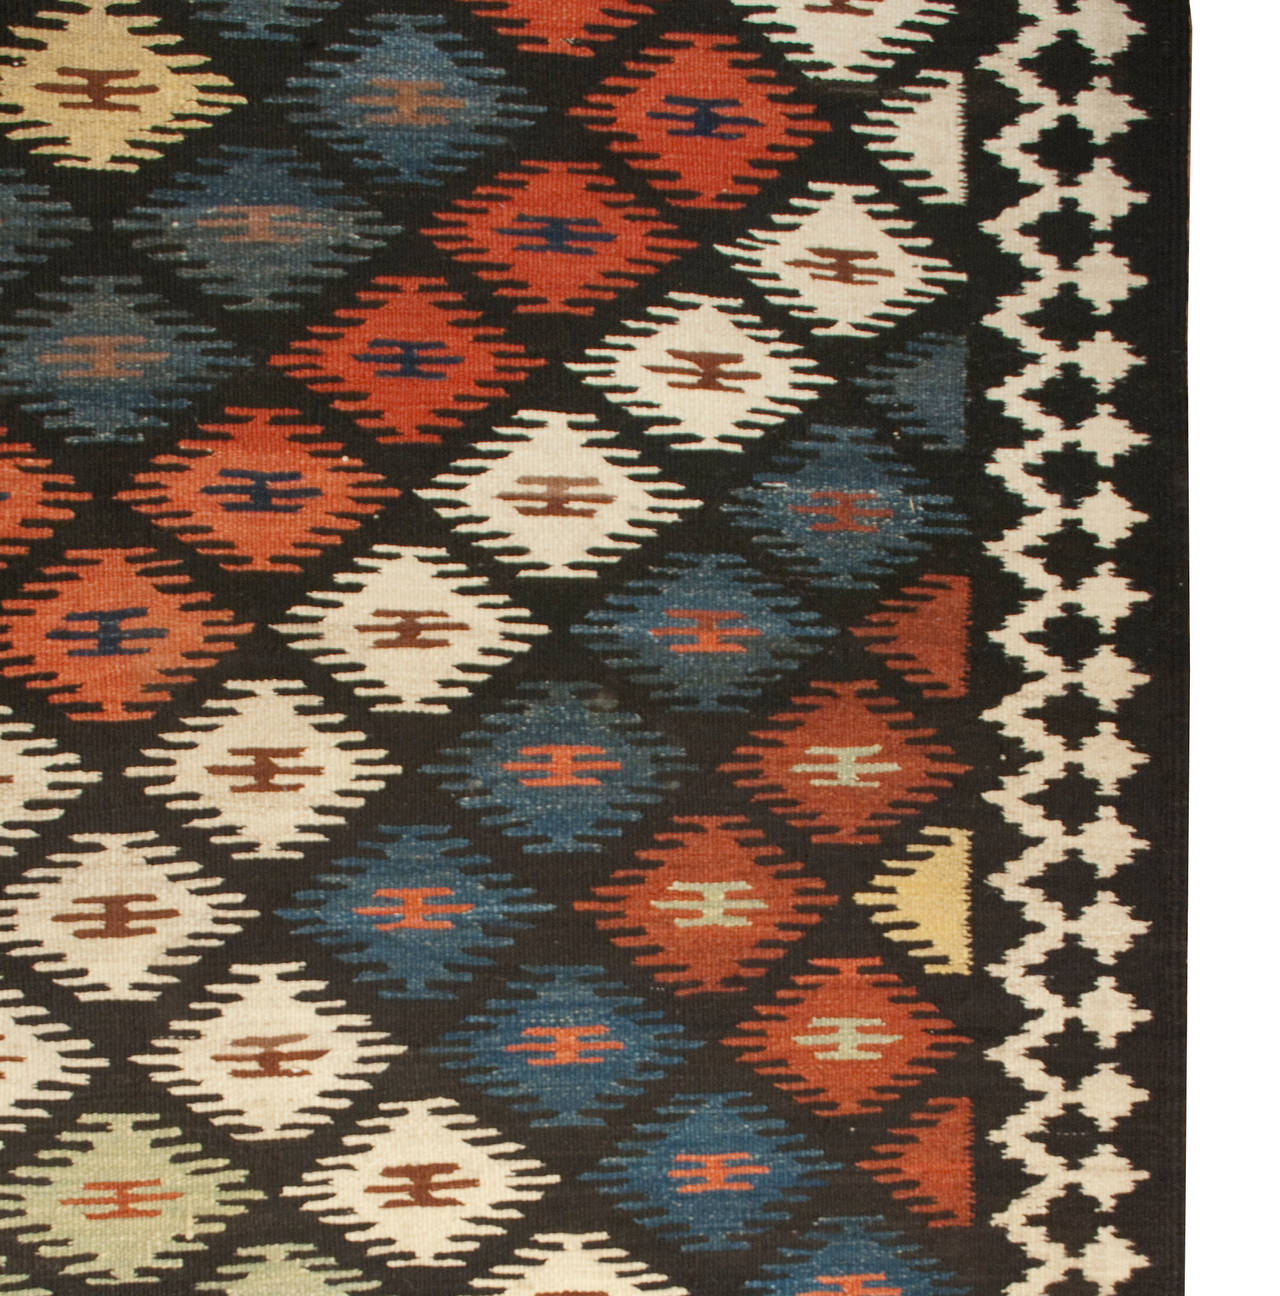 An early 20th century Persian Shahsavan Kilim runner with all-over multicolored diamond pattern surrounded by a contrasting geometric border.